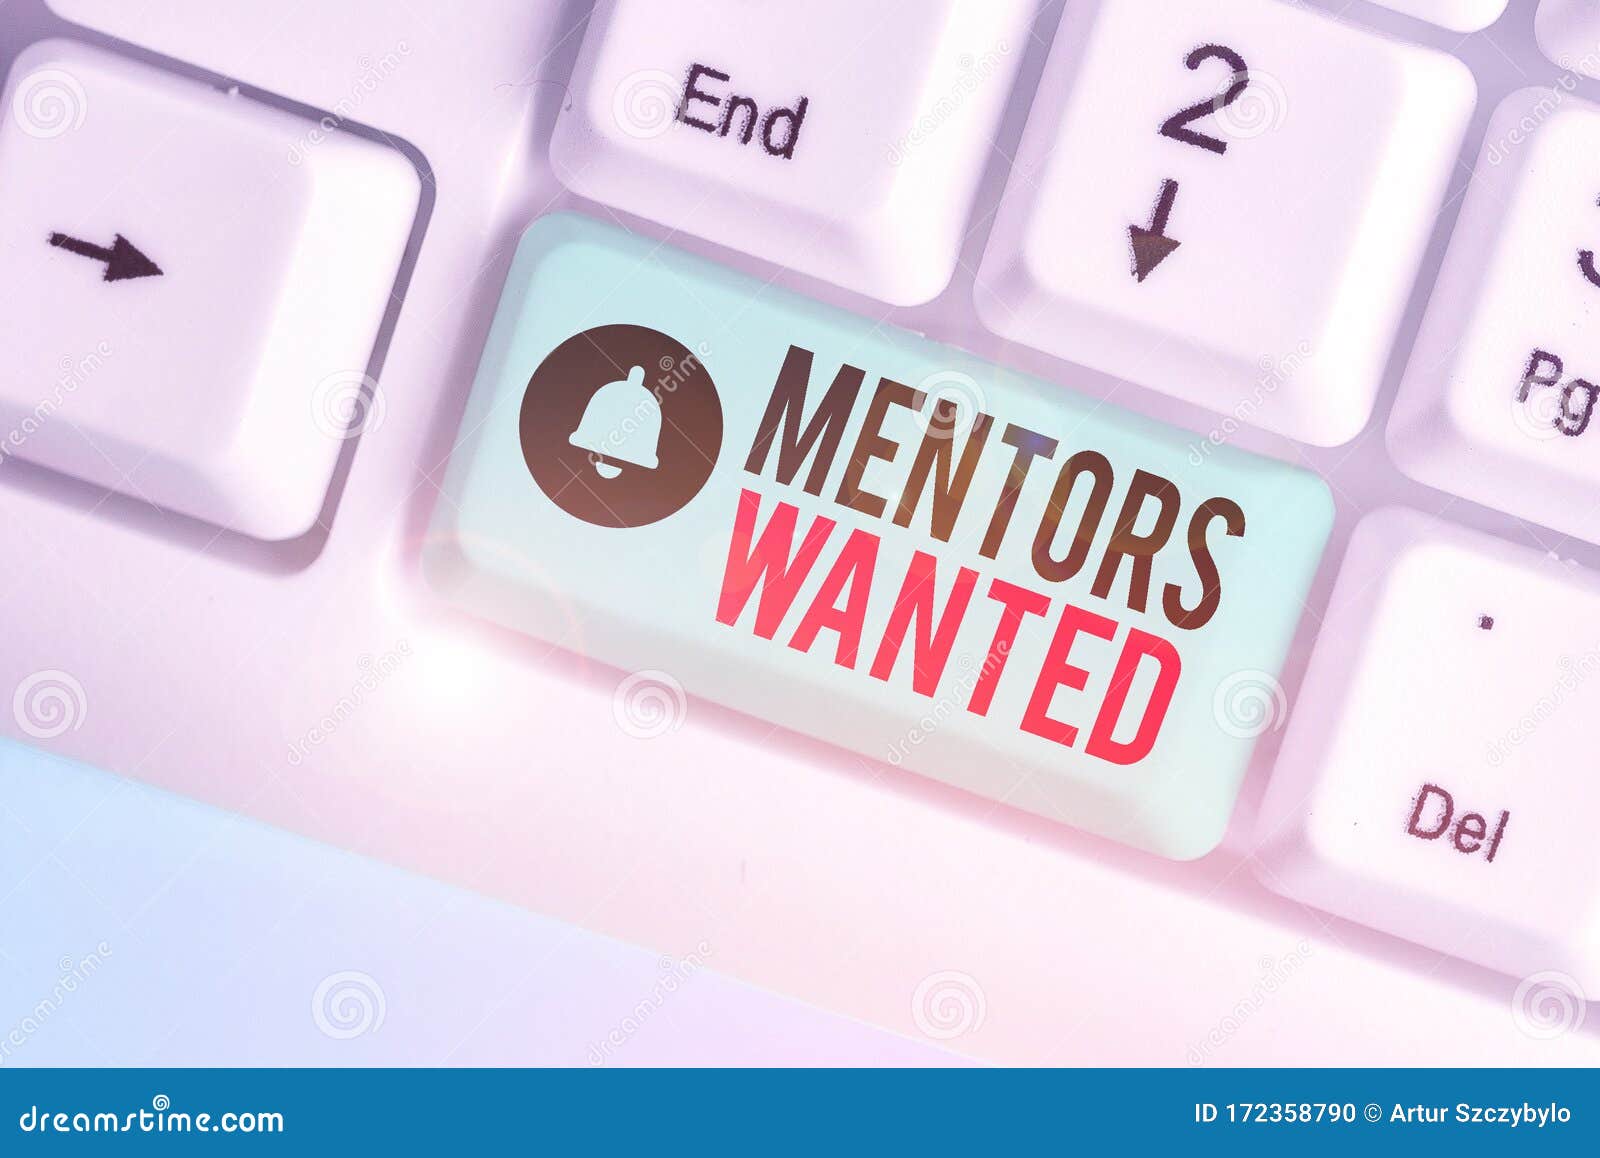 kedel indre triathlete Text Sign Showing Mentors Wanted. Conceptual Photo Looking for Someone Who  Teaches or Gives Help and Advice Stock Photo - Image of mentor, mentoring:  172358790